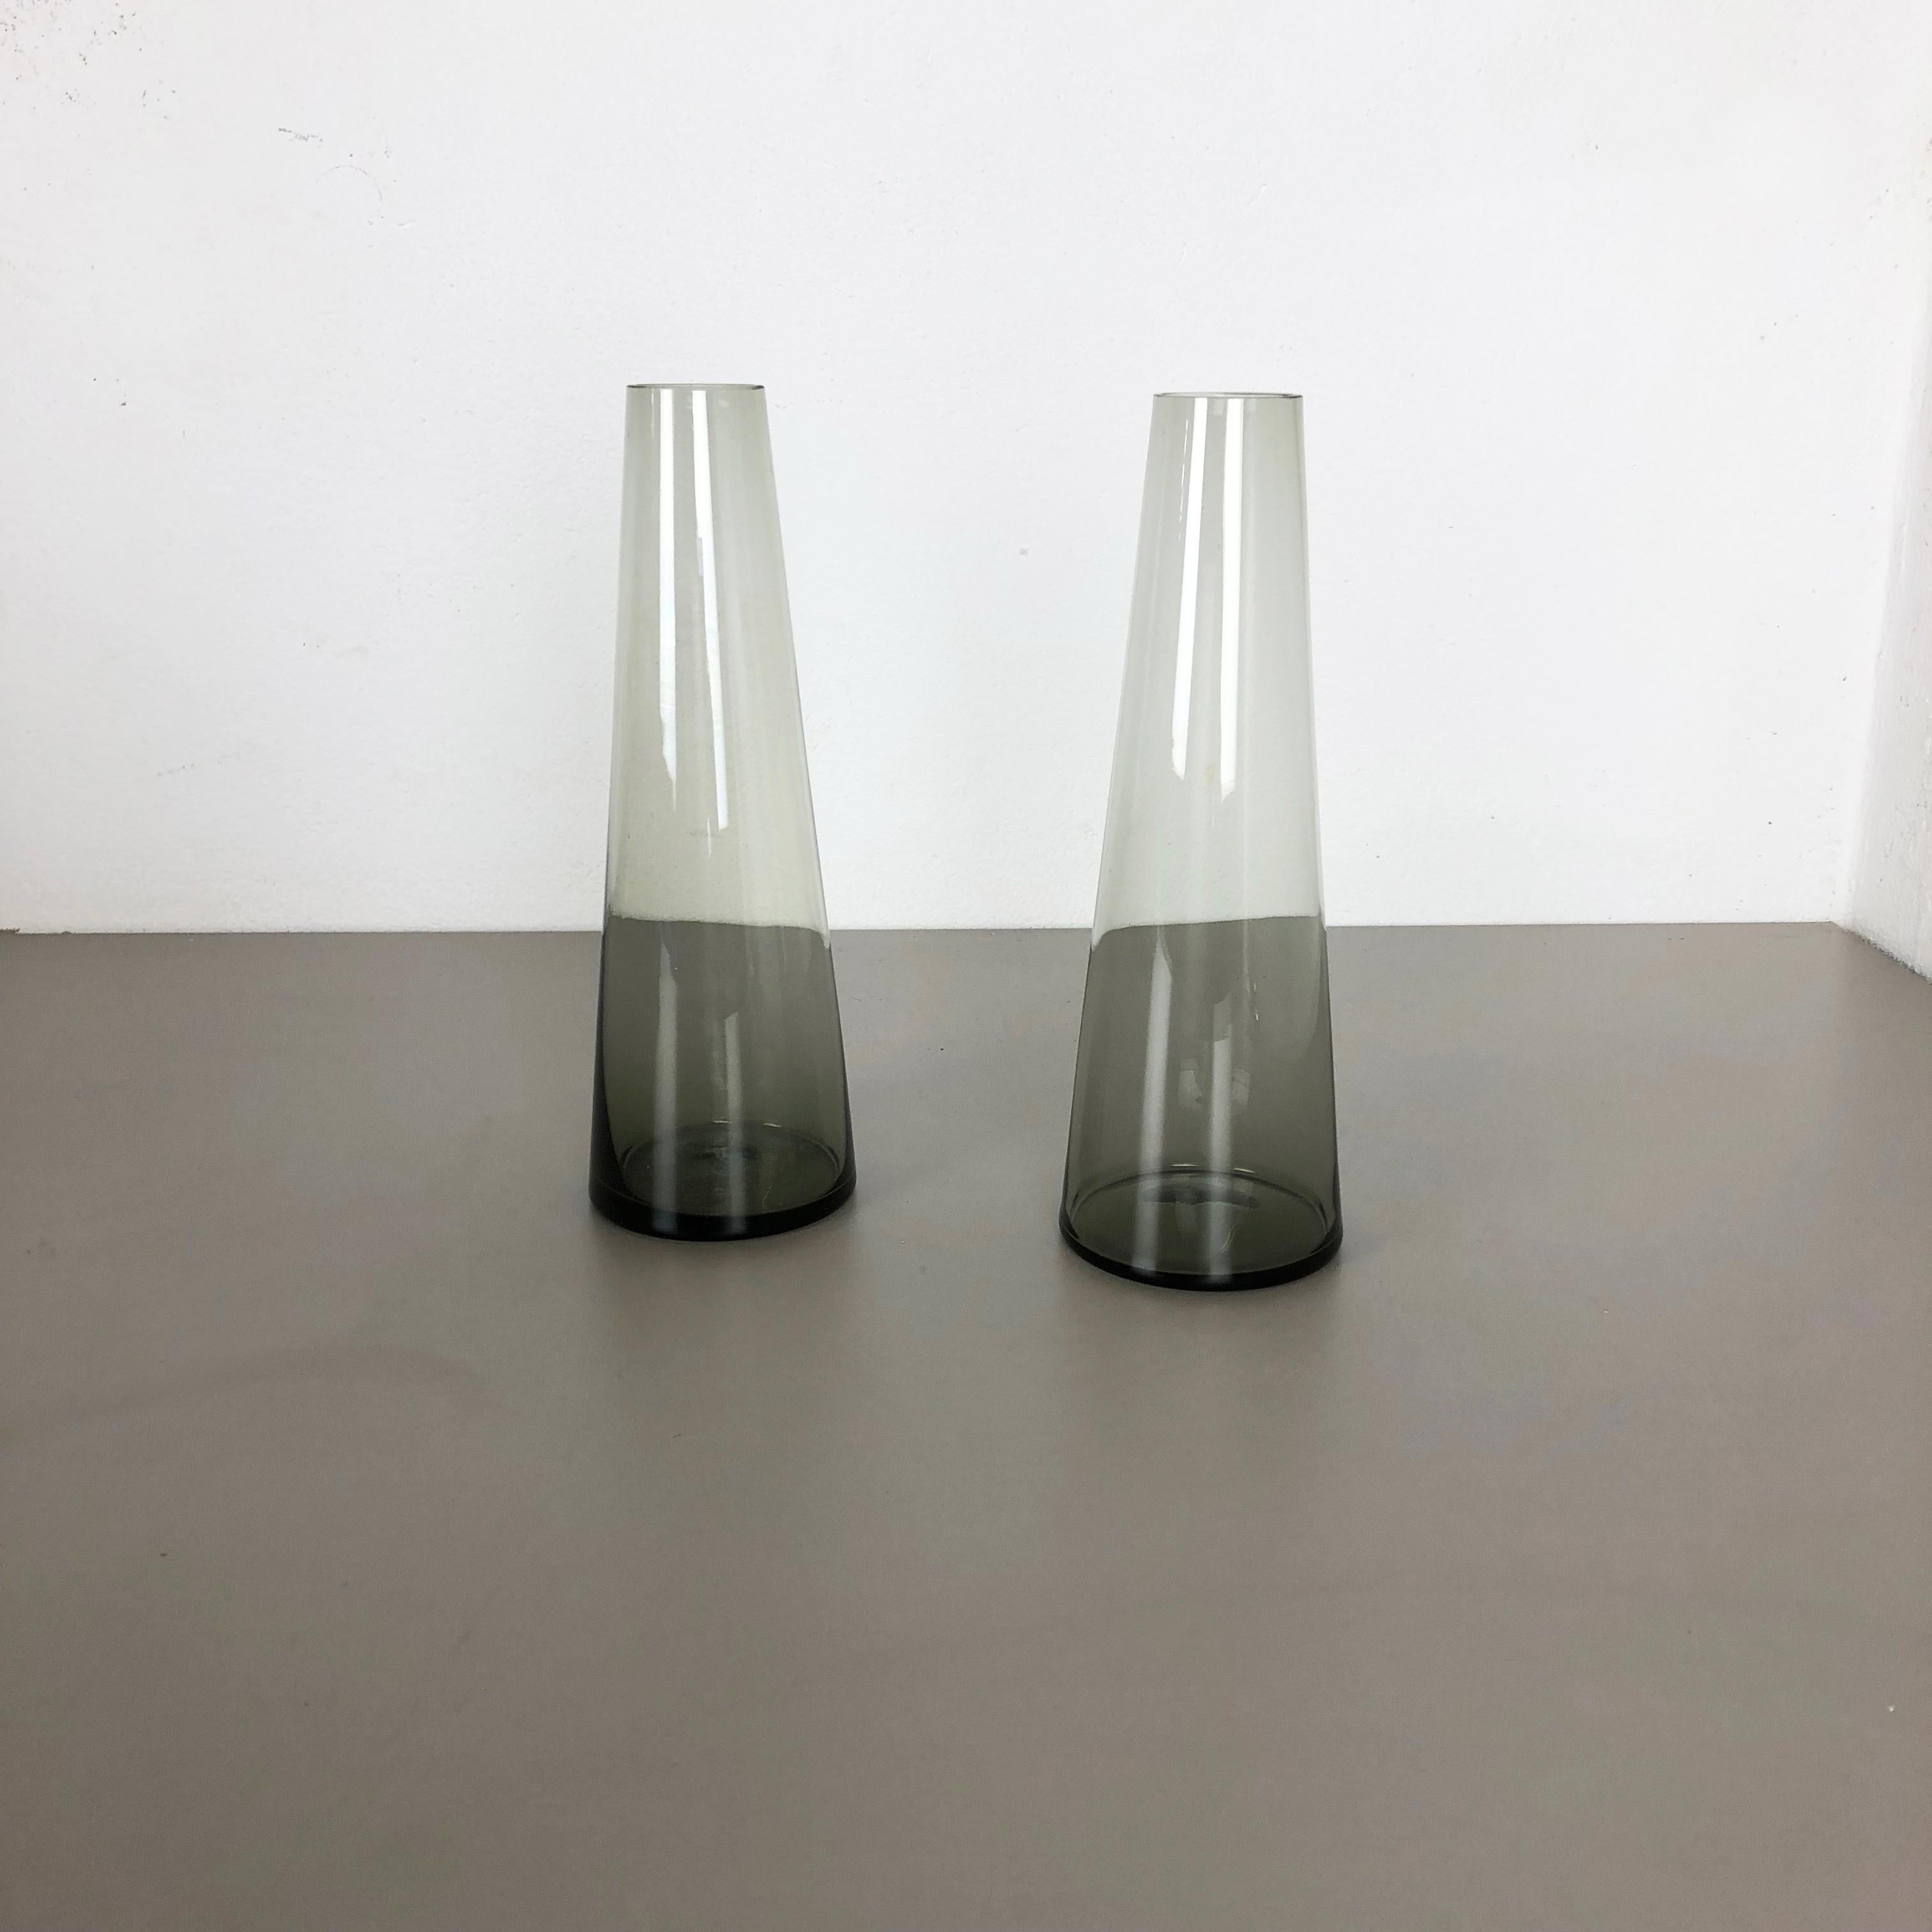 Article:

Set of 2 Turmalin vases


Producer:

WMF, Germany


Design:

Prof. Wilhelm Wagenfeld Bauhaus 



Decade:

1960s


Description:

Original vintage 1960s set of 2 vases of the Wagenfeld Turmalin series. These two vase